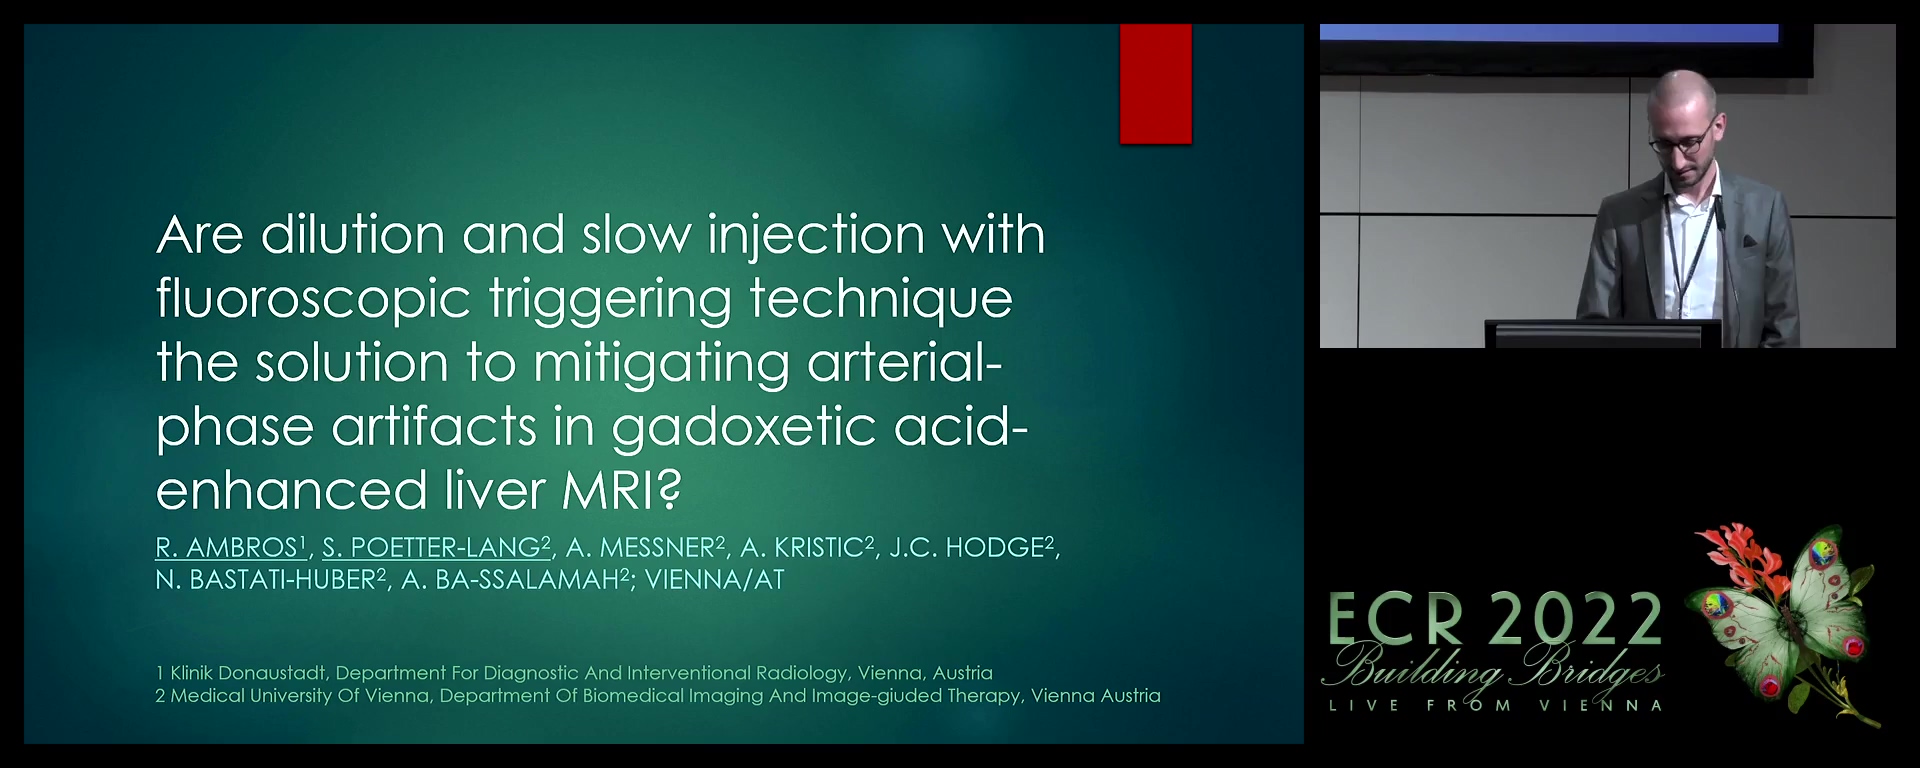 Are dilution and slow injection with fluoroscopic triggering technique the solution to mitigating arterial-phase artifacts in gadoxetic acid enhanced liver MRI? - Raphael Ambros, Wien / AT